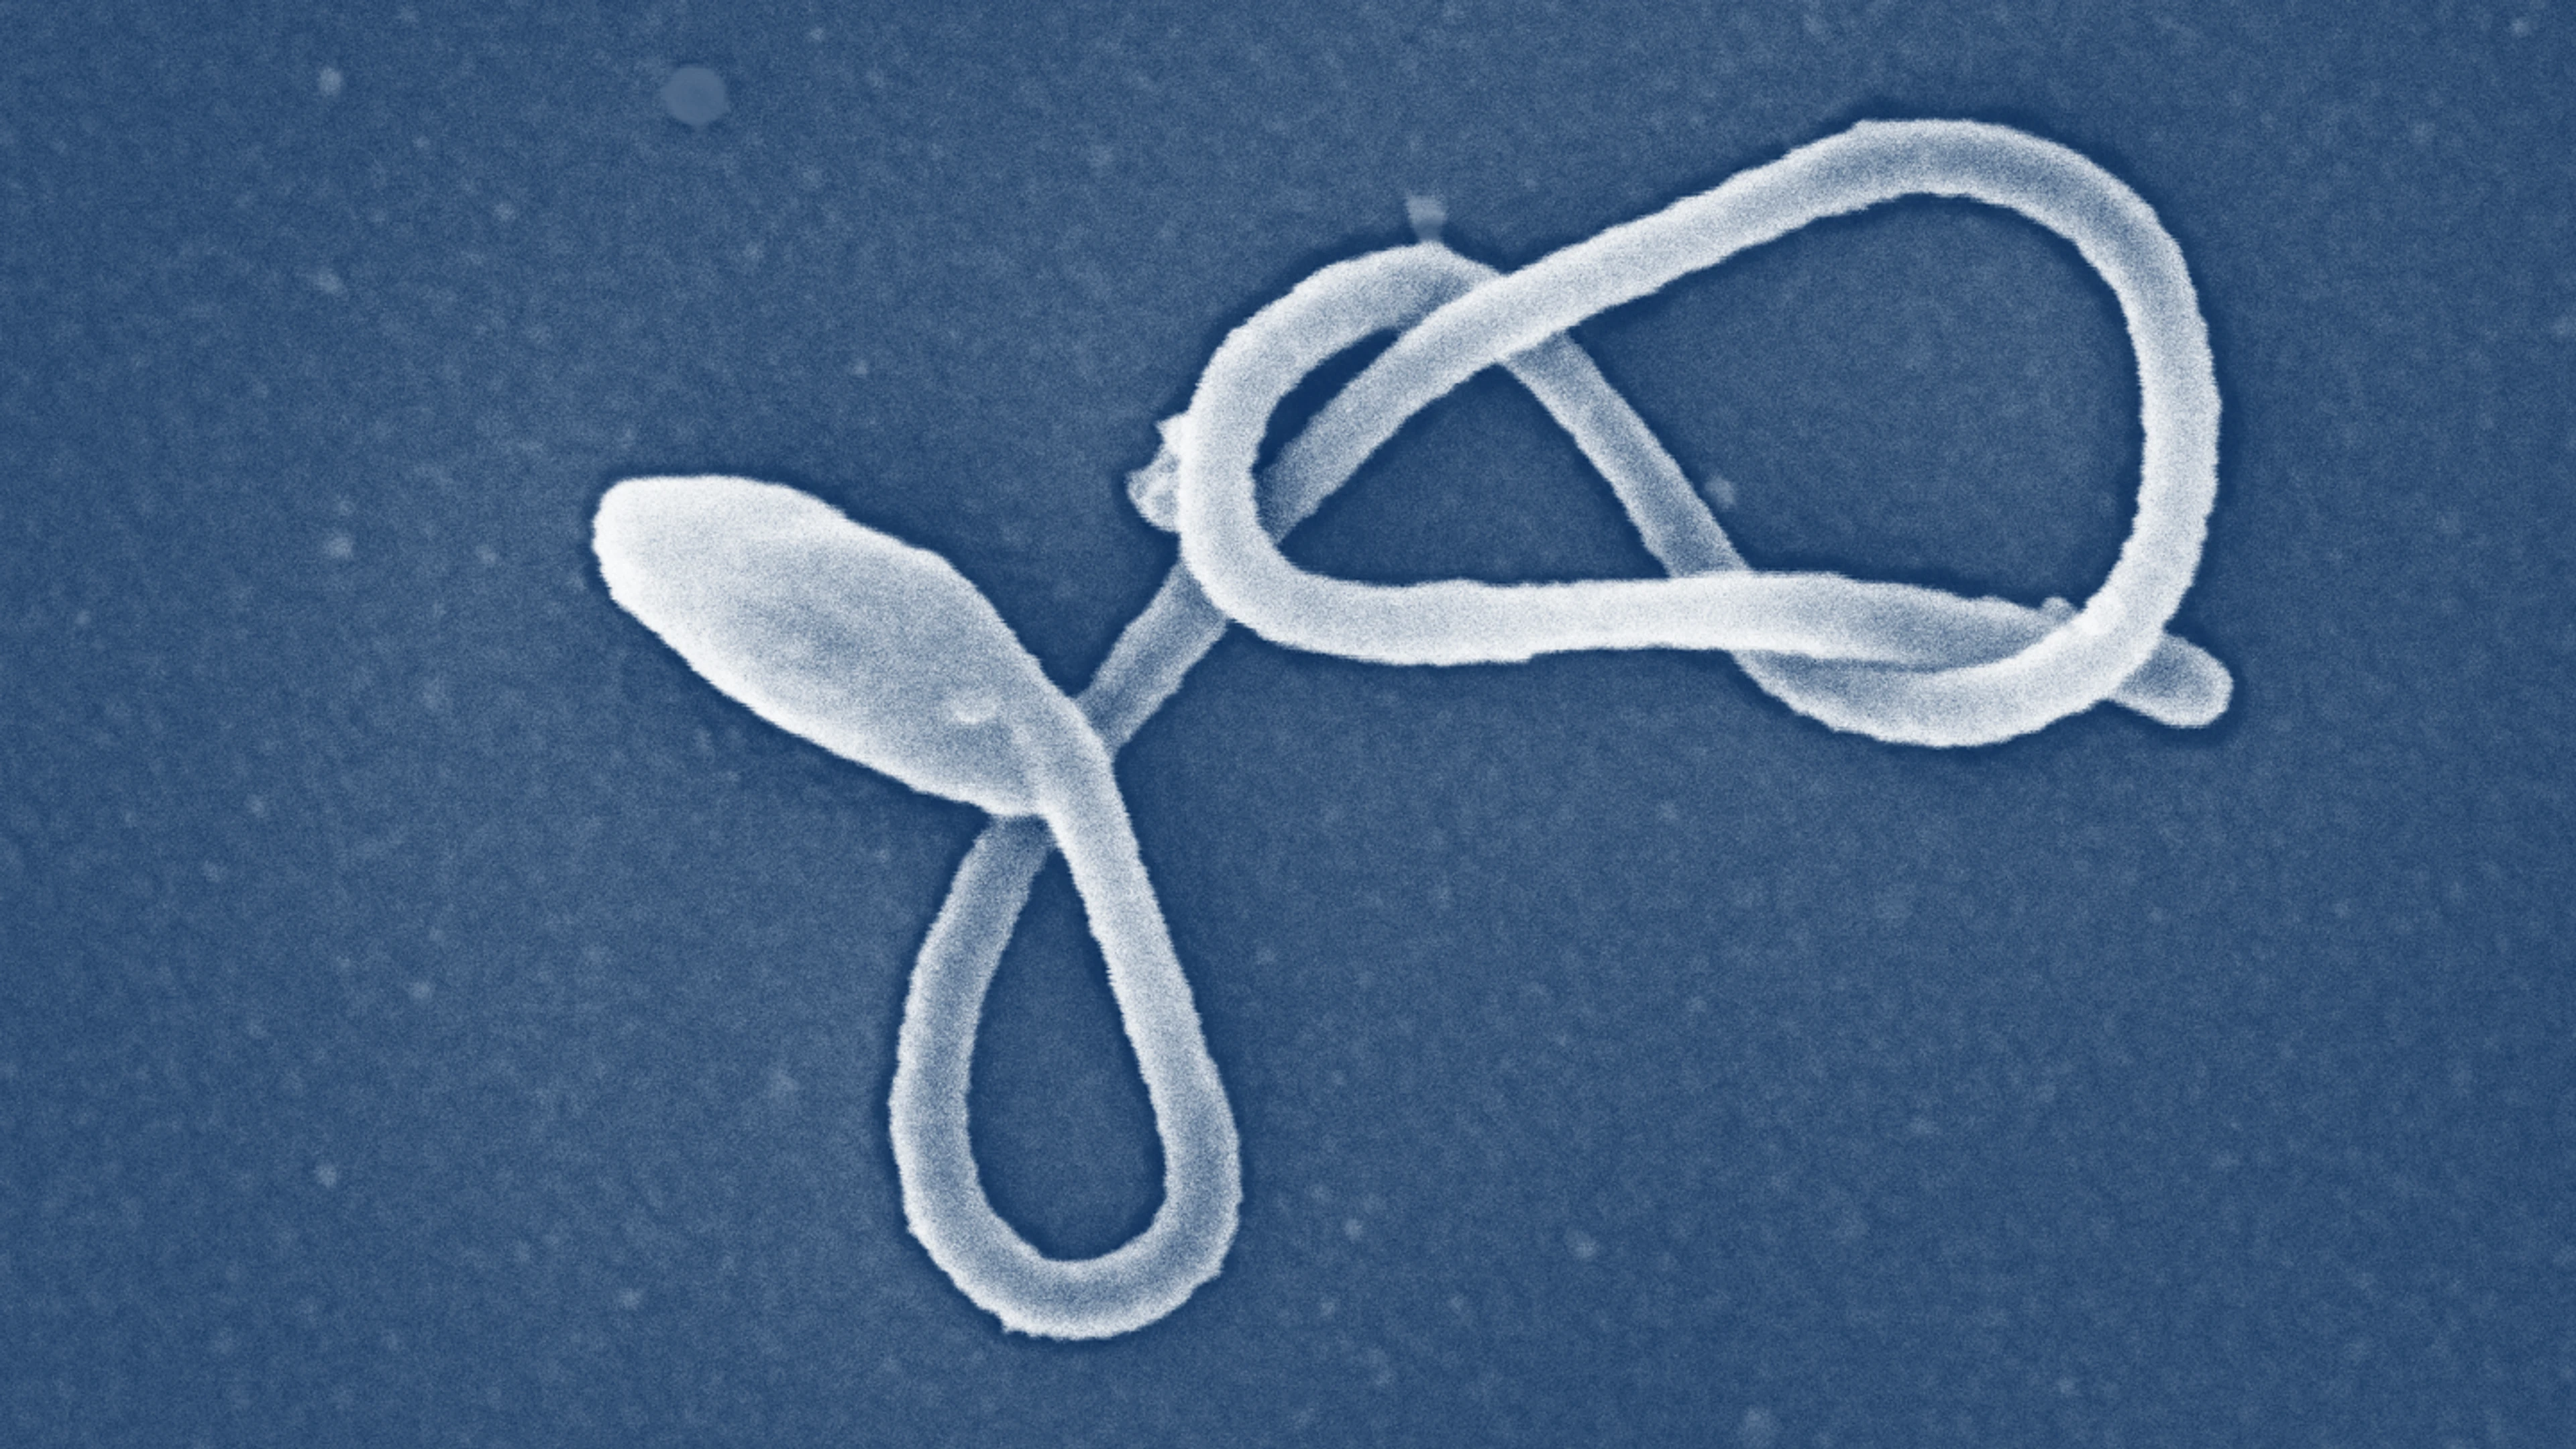 A close up image of an Ebola virus particle